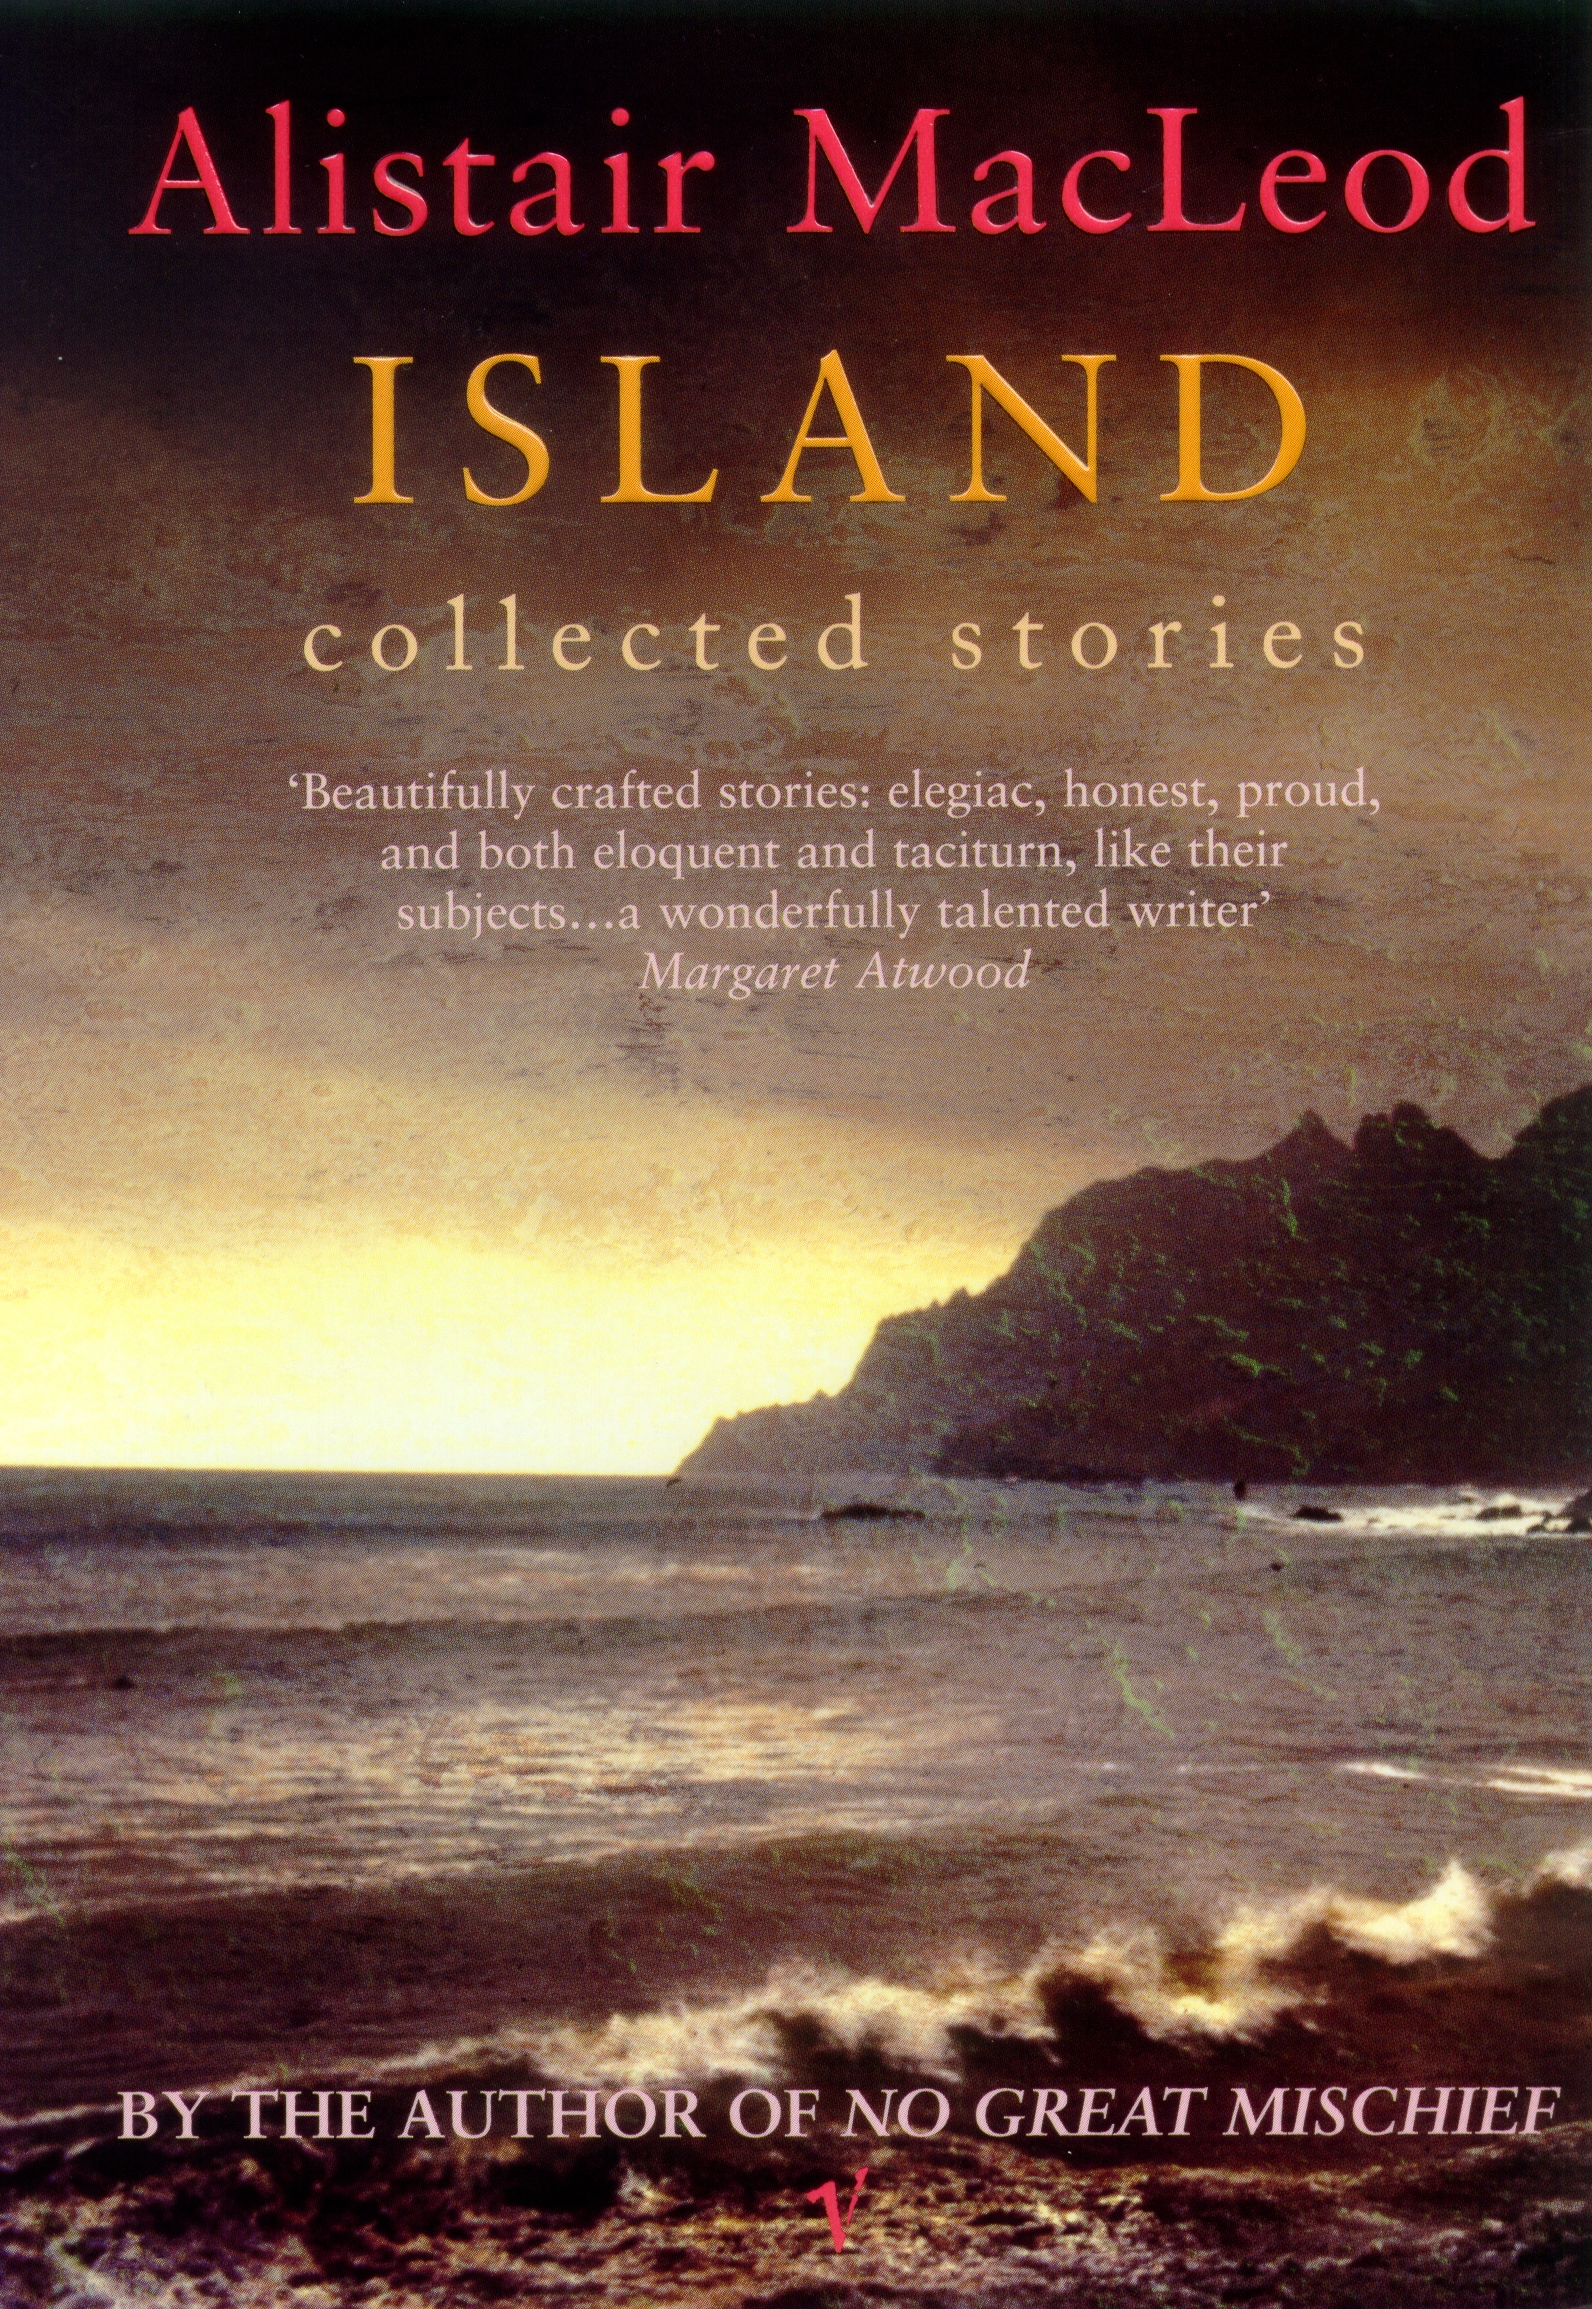 The front cover of a book featuring a moody, darkly lit image of cliffs and a beach.